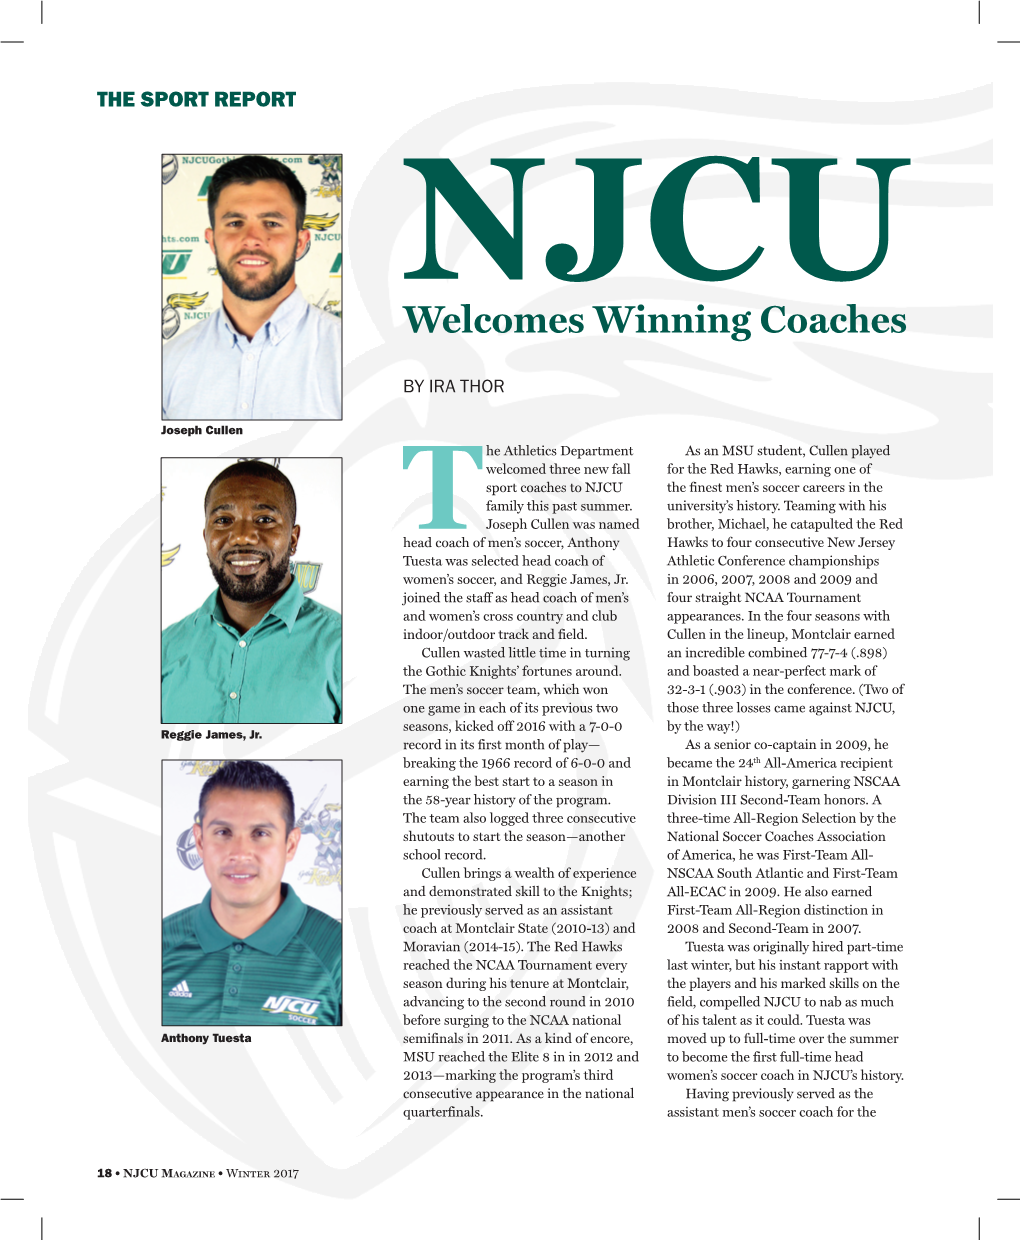 Welcomes Winning Coaches